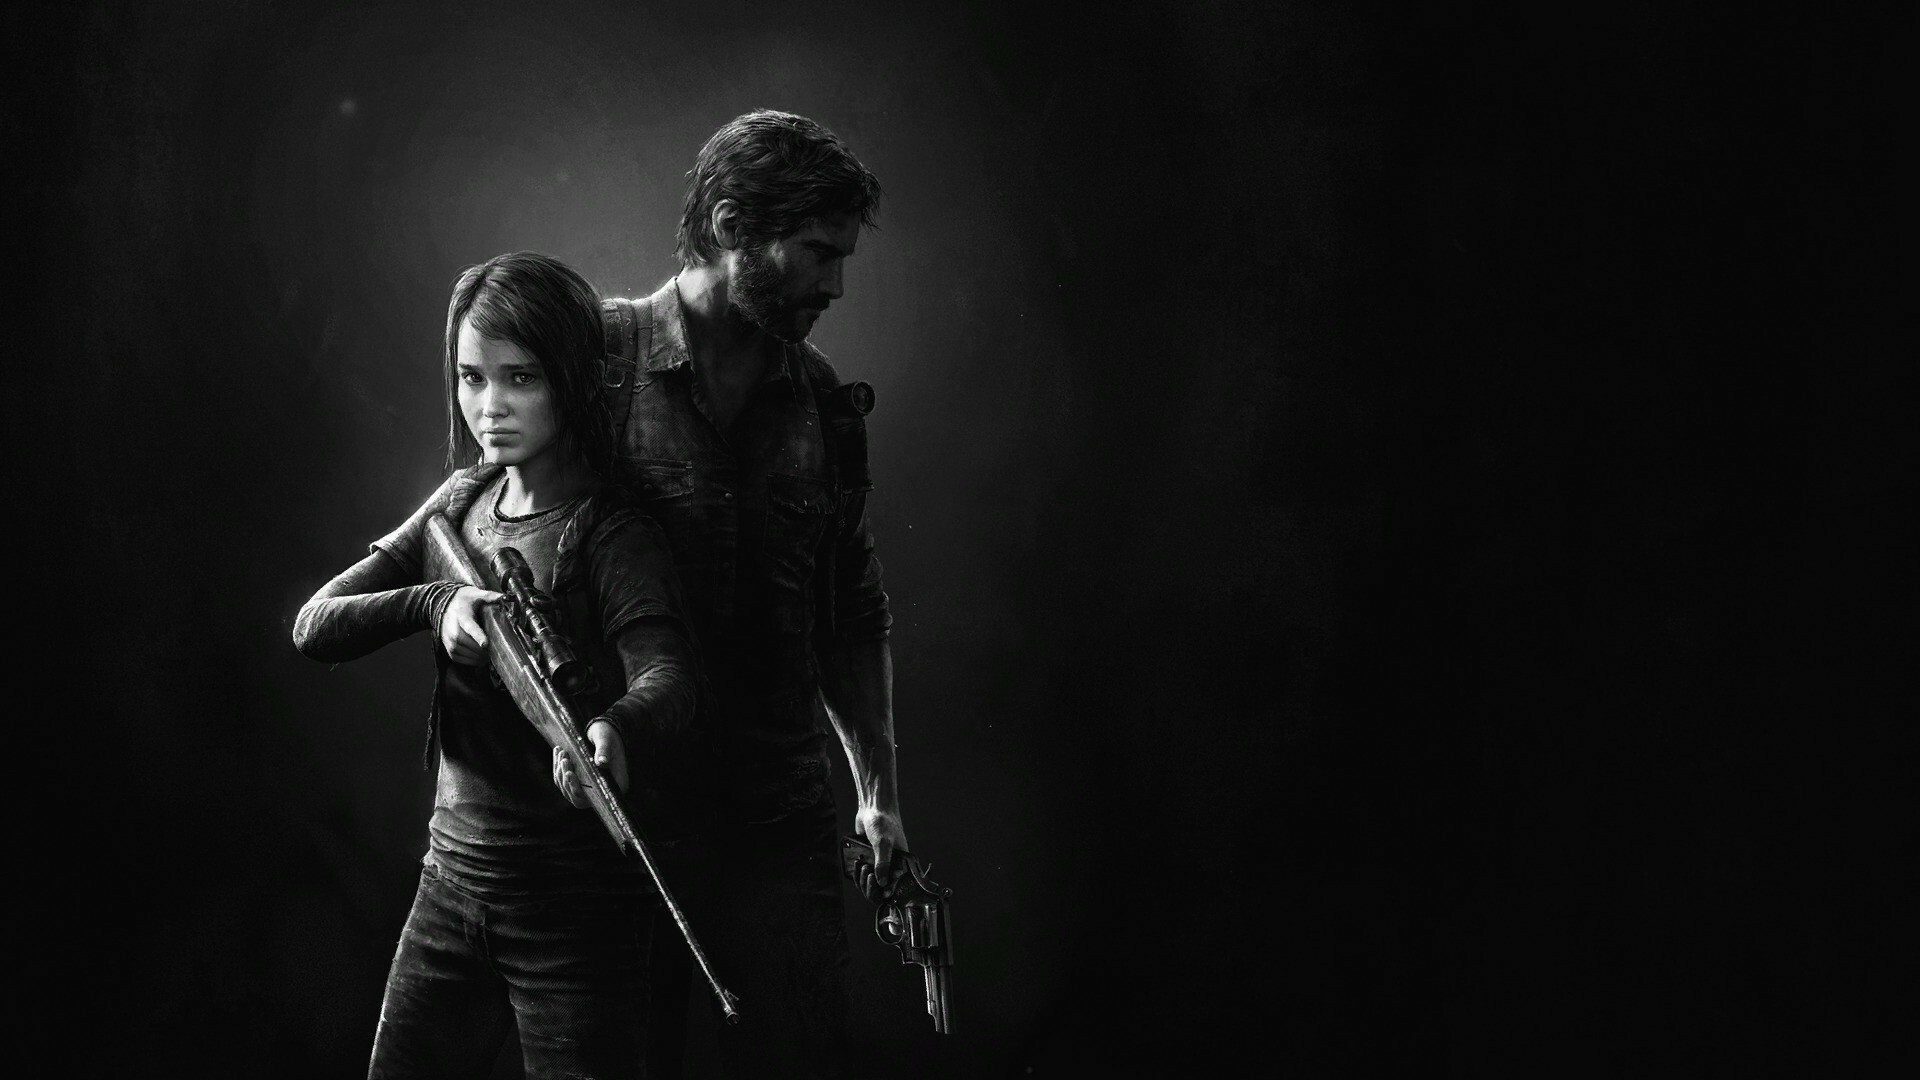 The Last of Us: Awarded Outstanding Innovation in Gaming at the DICE Awards, and Best Third-Person Shooter from GameTrailers. 1920x1080 Full HD Background.